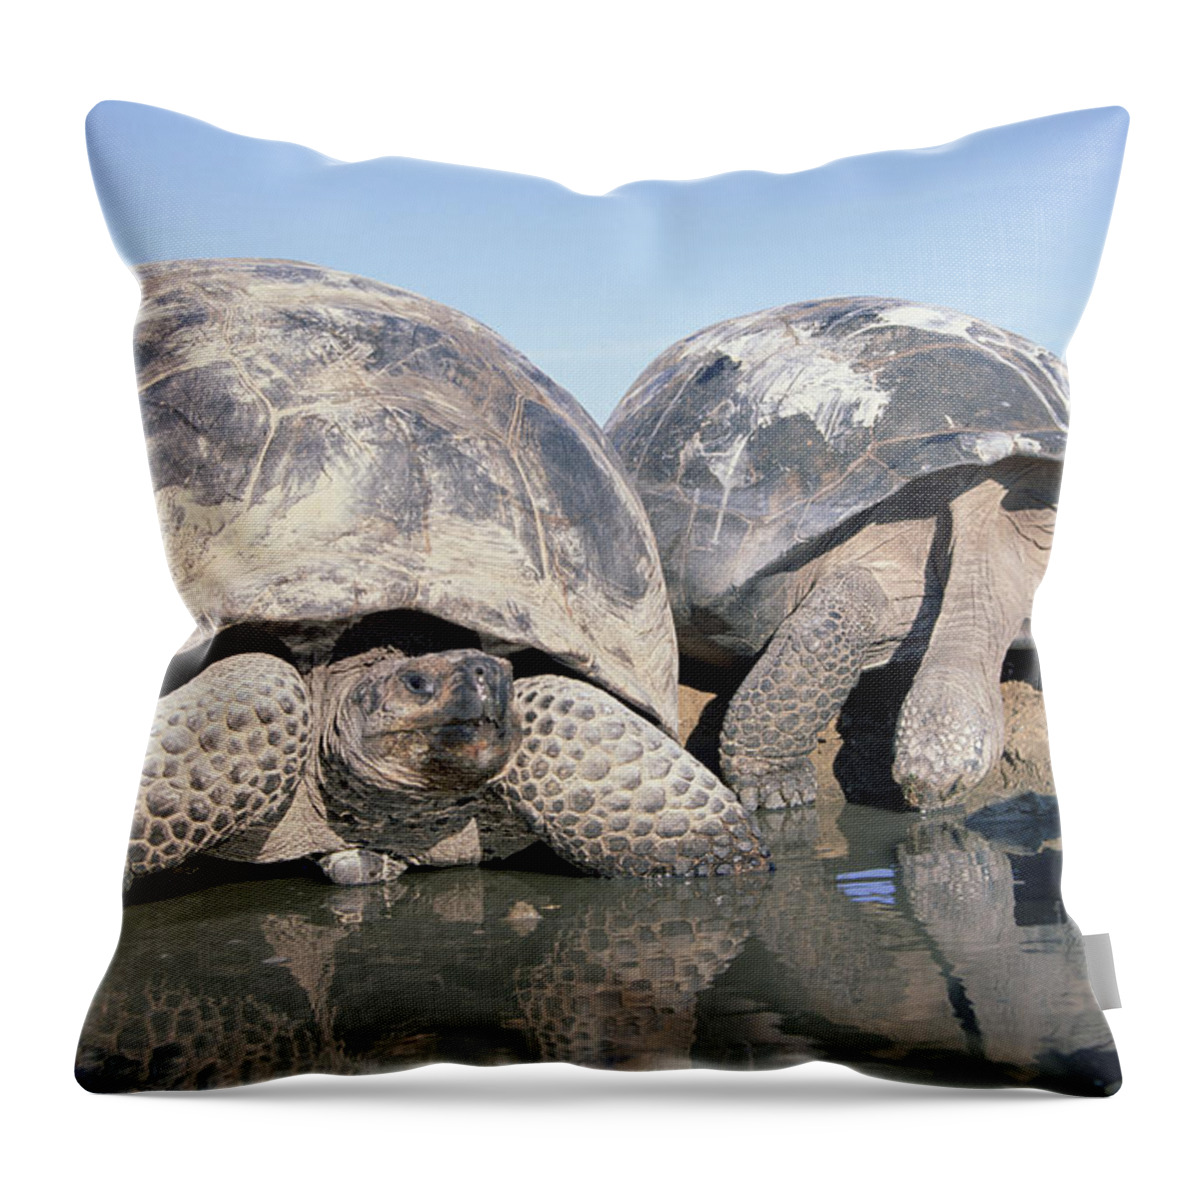 Feb0514 Throw Pillow featuring the photograph Volcan Alcedo Giant Tortoises Pair by Tui De Roy